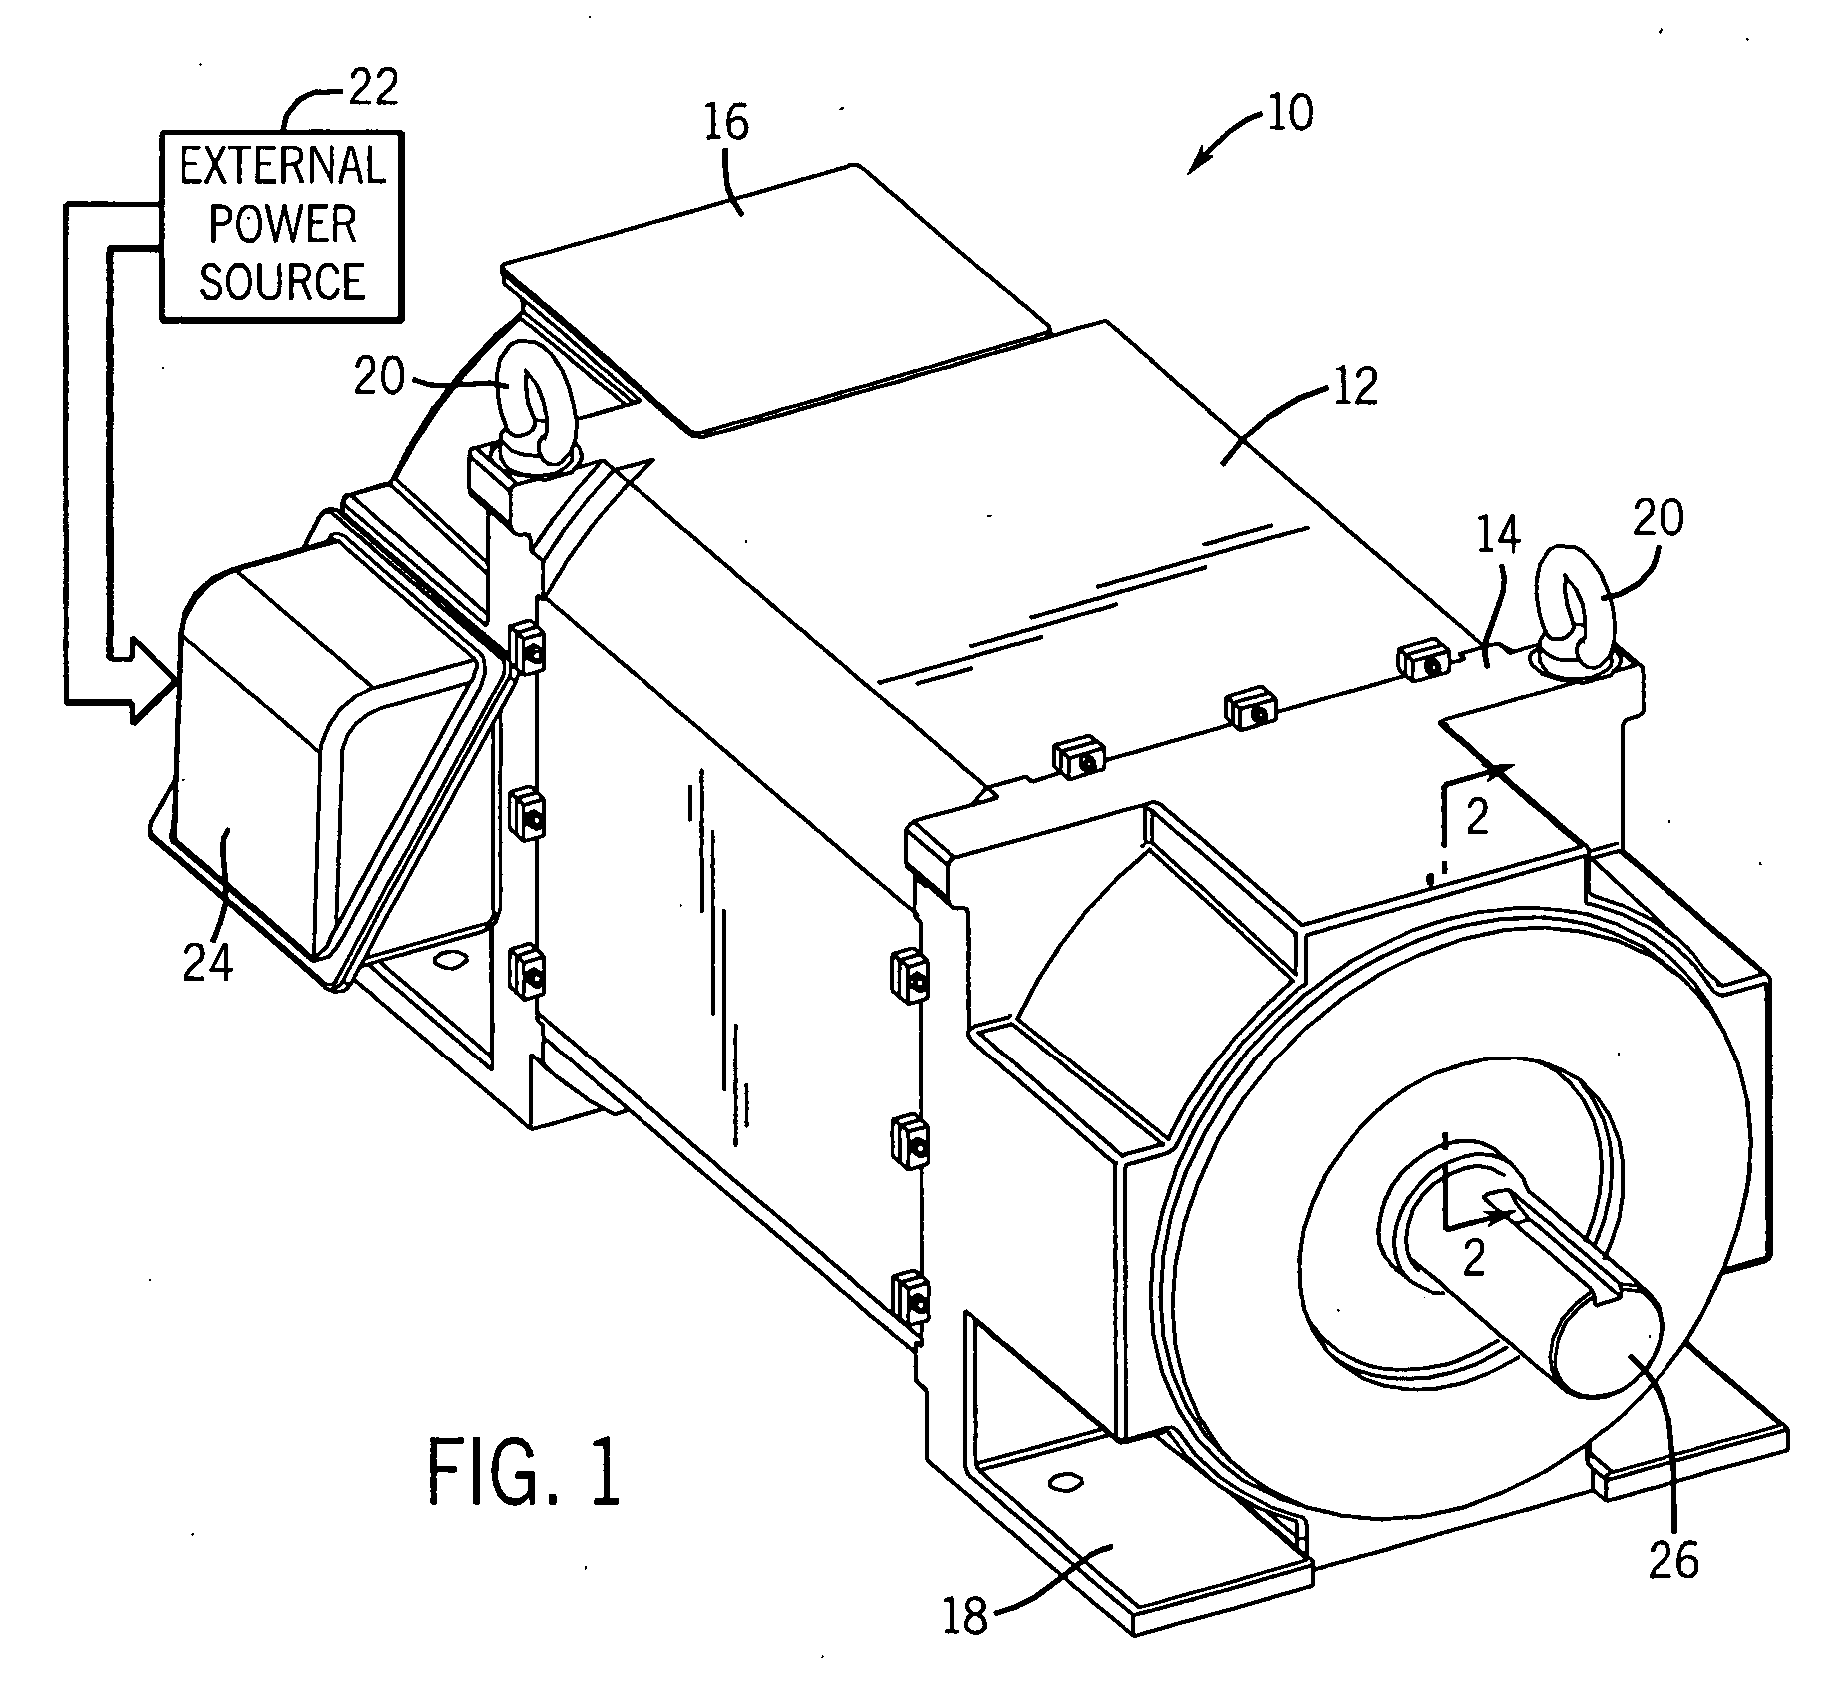 Electric motor having different stator lamination and rotor lamination constructions